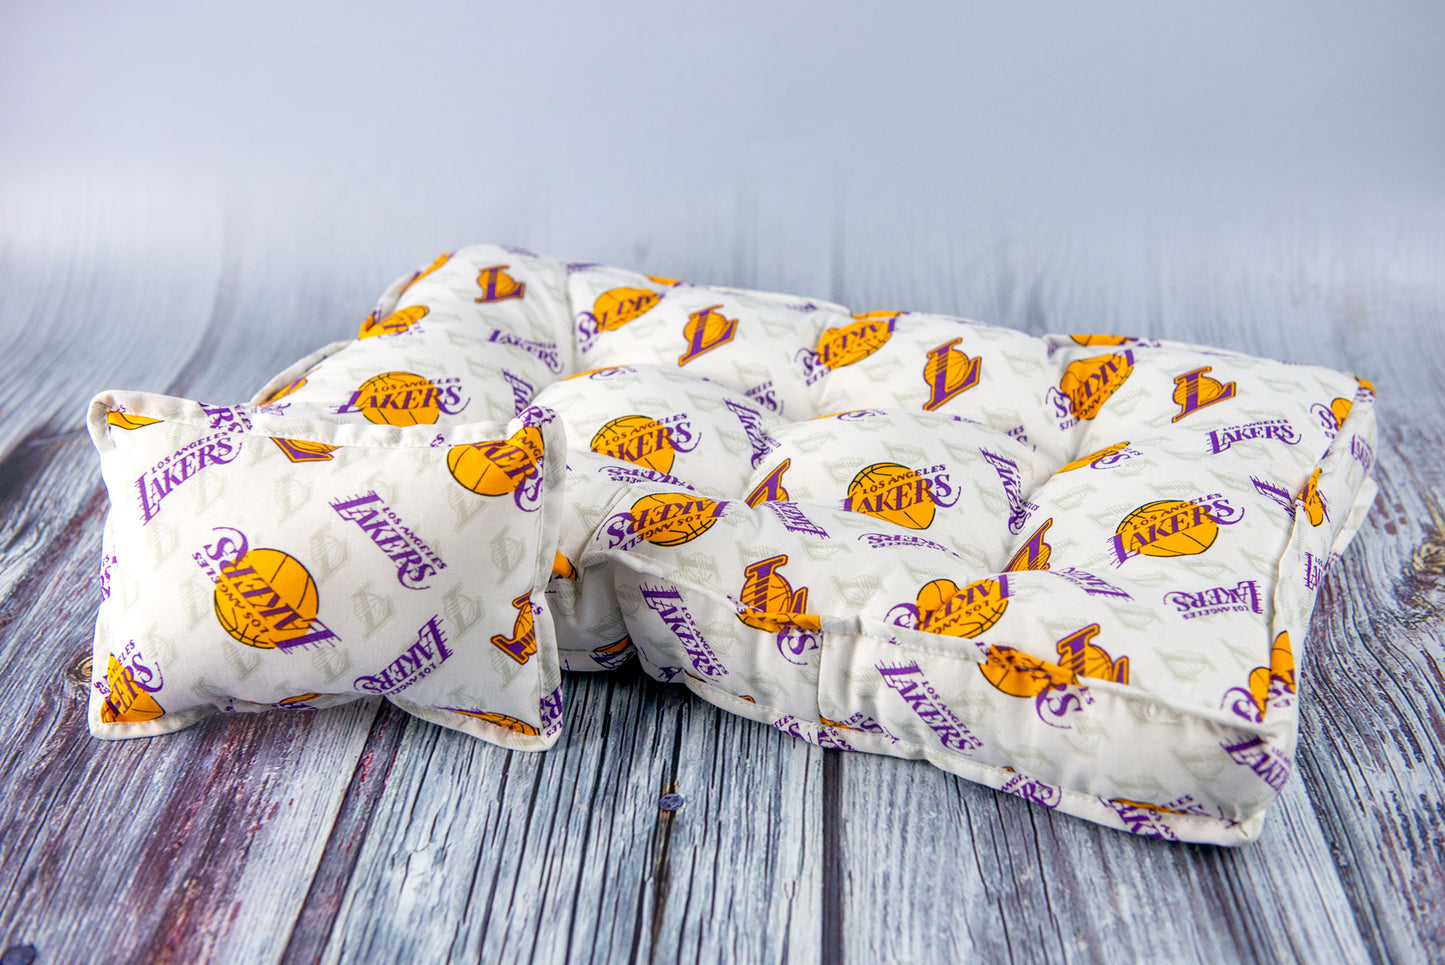 SET Mattress and Pillow - Los Angeles Lakers